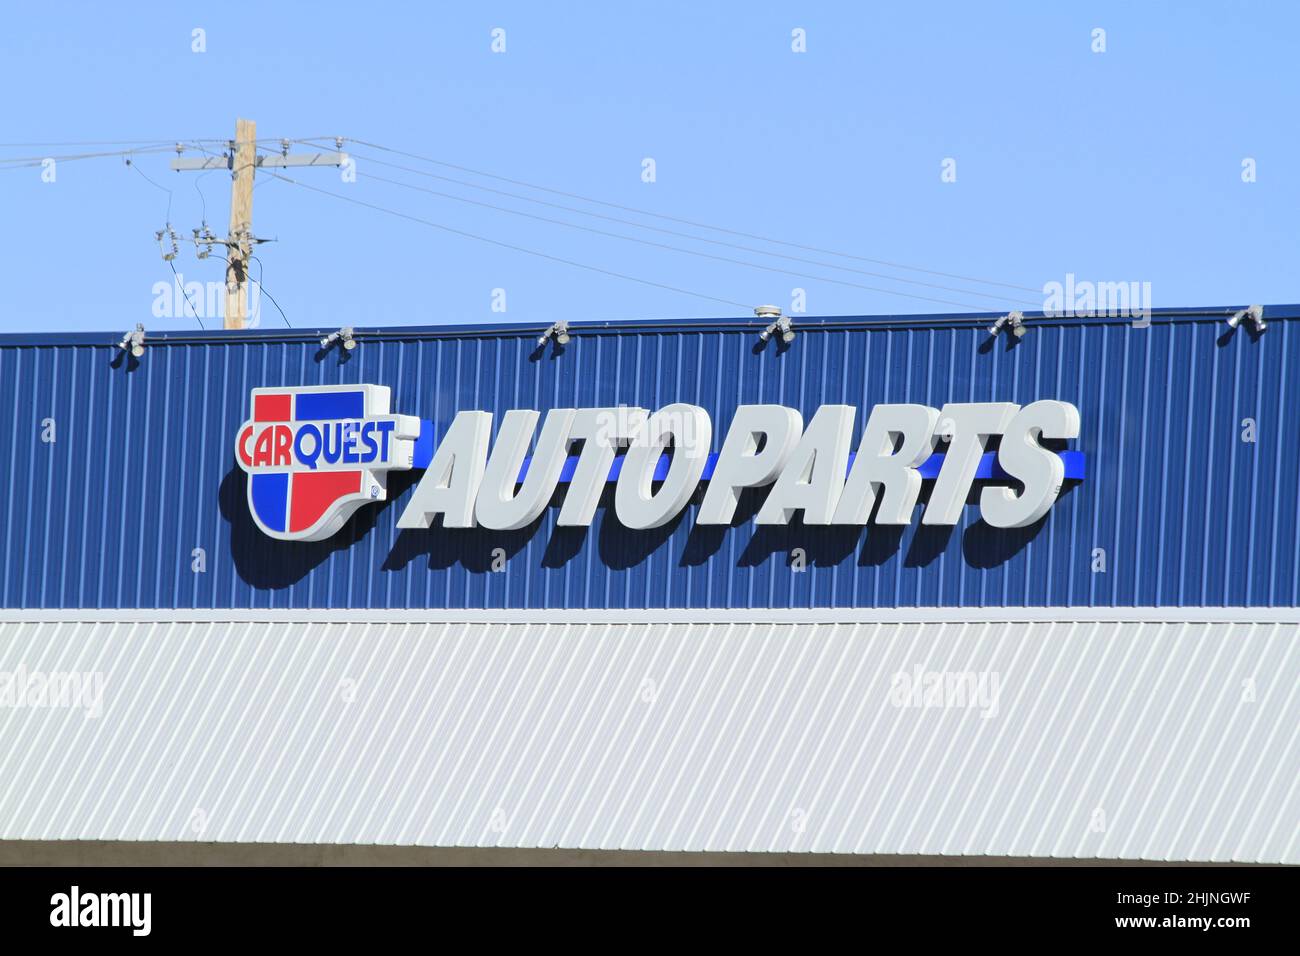 CARQUEST AUTO PARTS Advertisement sign that's bright and colorful on a building in Kansas. Stock Photo